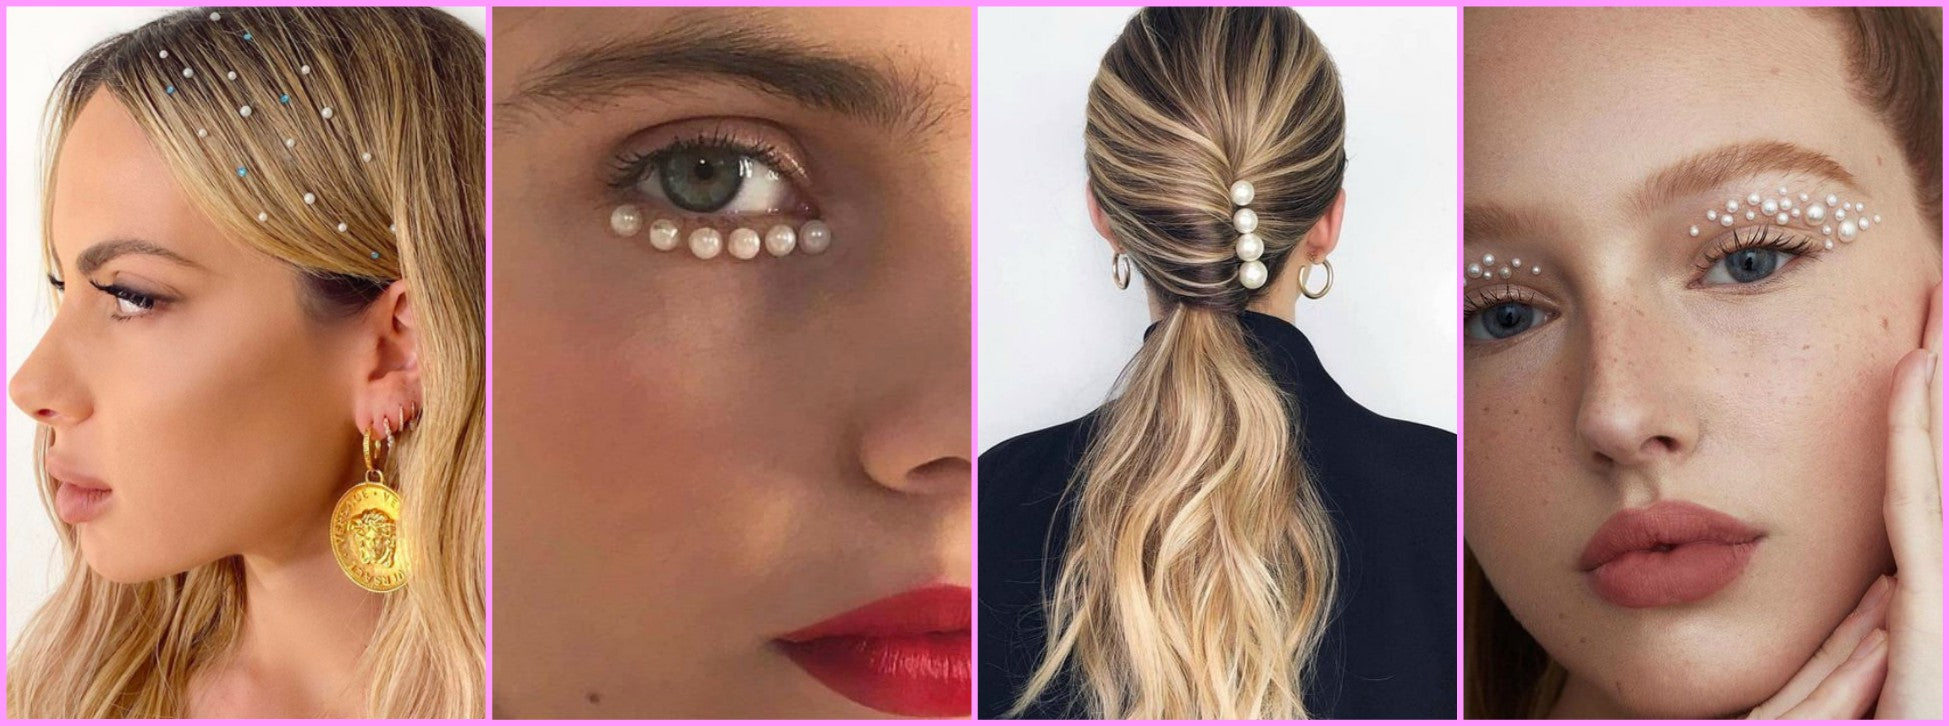 Trend Alert: Pearls For Hair And Makeup!